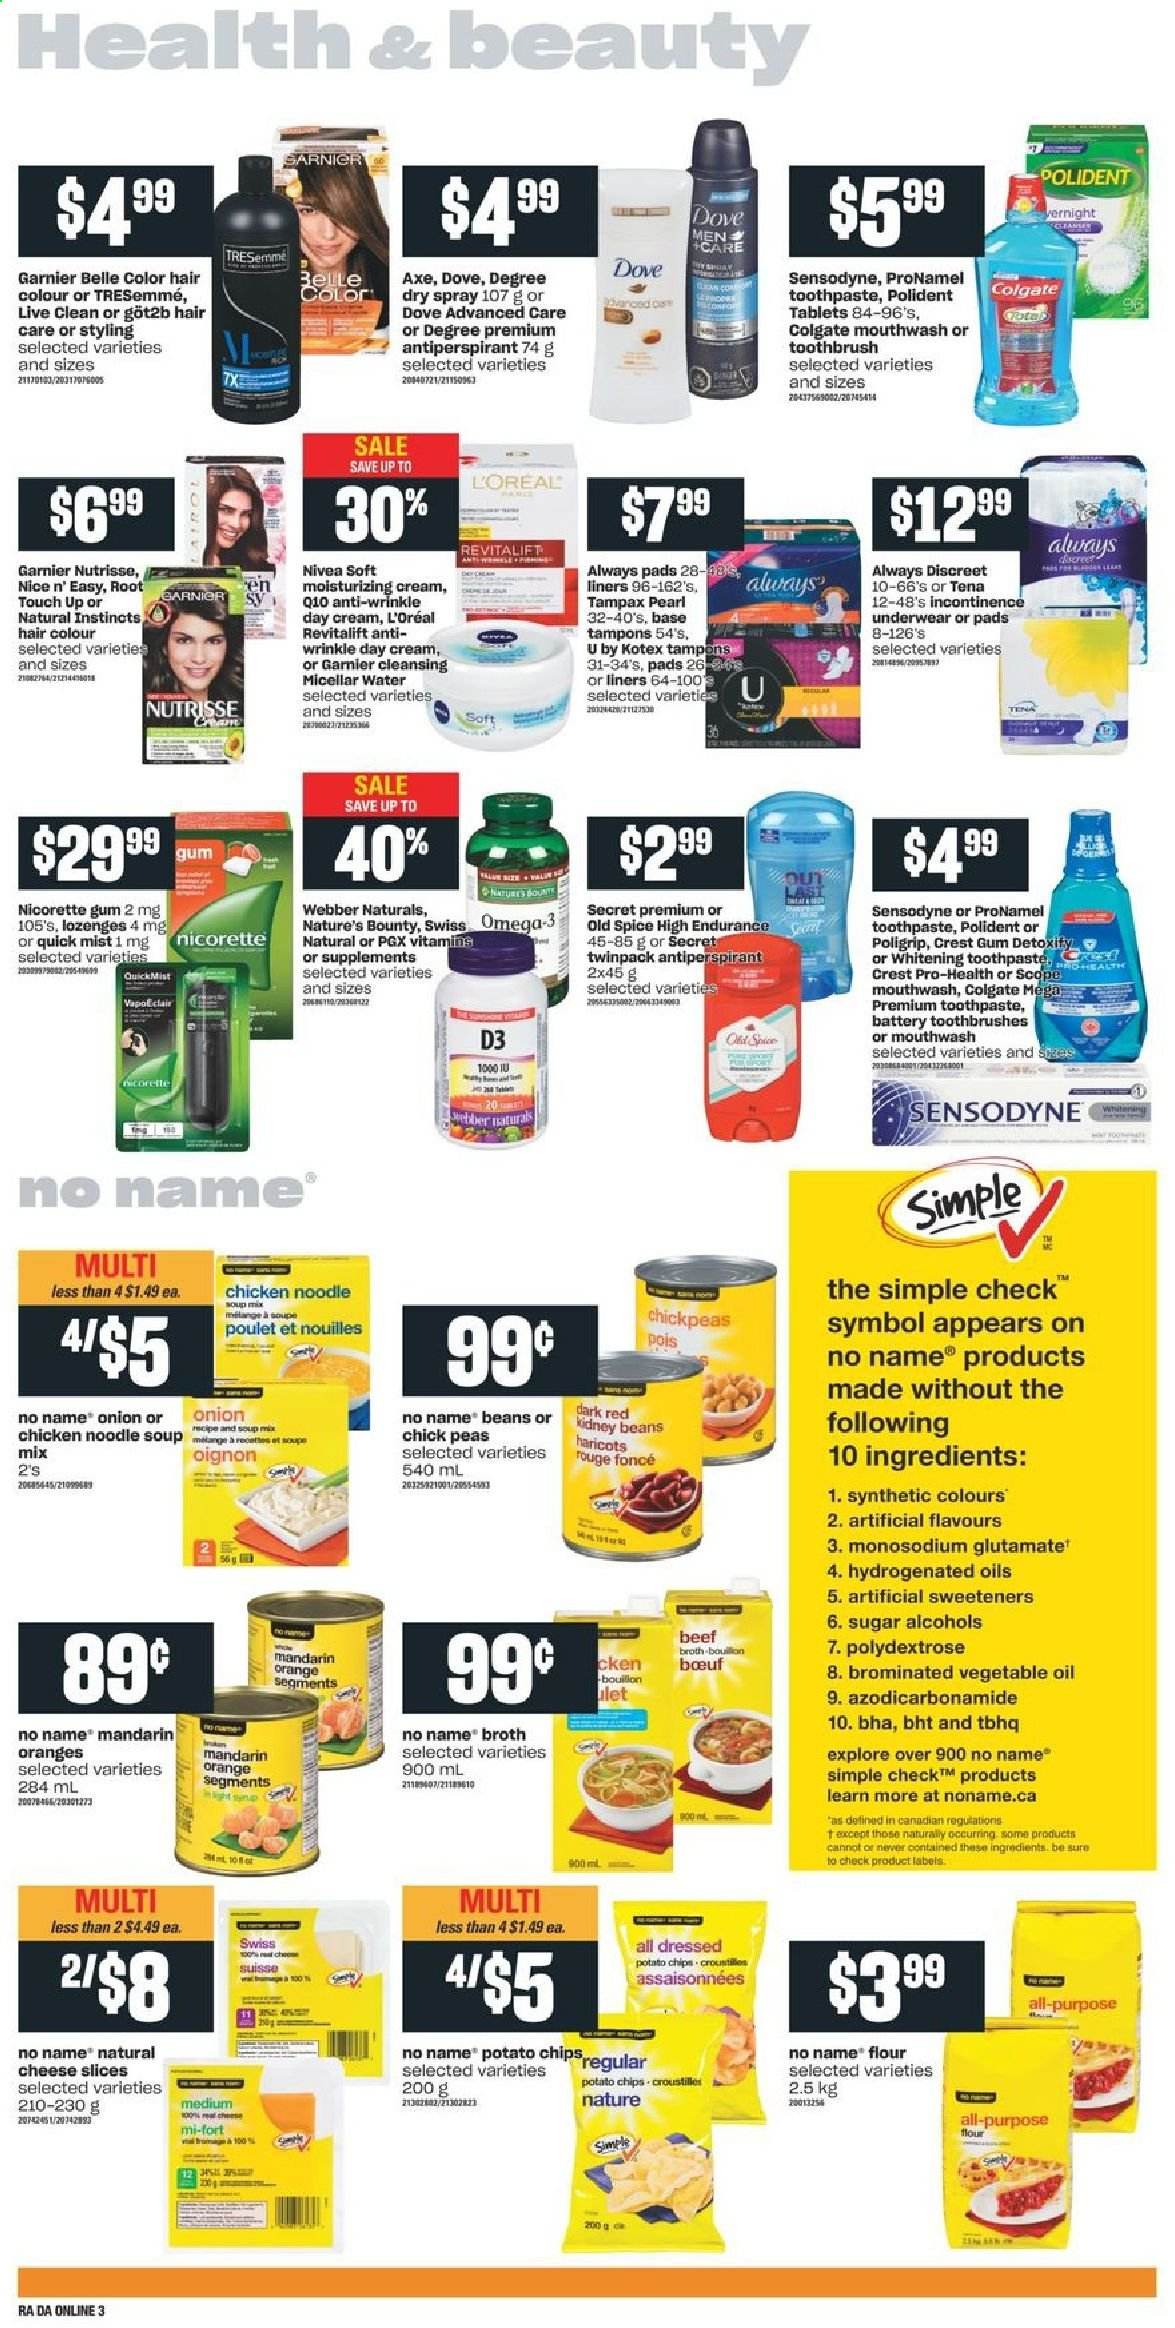 thumbnail - Atlantic Superstore Flyer - January 14, 2021 - January 20, 2021 - Sales products - mandarines, No Name, soup mix, soup, noodles cup, noodles, sliced cheese, cheese, potato chips, beef broth, bouillon, flour, sugar, broth, kidney beans, chickpeas, spice, vegetable oil, oil, toothbrush, toothpaste, mouthwash, Polident, Crest, Always pads, Always Discreet, Kotex, incontinence underwear, tampons, day cream, L’Oréal, micellar water, TRESemmé, hair color, anti-perspirant, Sure, Nature's Bounty, Nicorette, Omega-3, Nicorette Gum, vitamin D3, Garnier, Tampax, Nivea, Old Spice, chips, Sensodyne. Page 7.